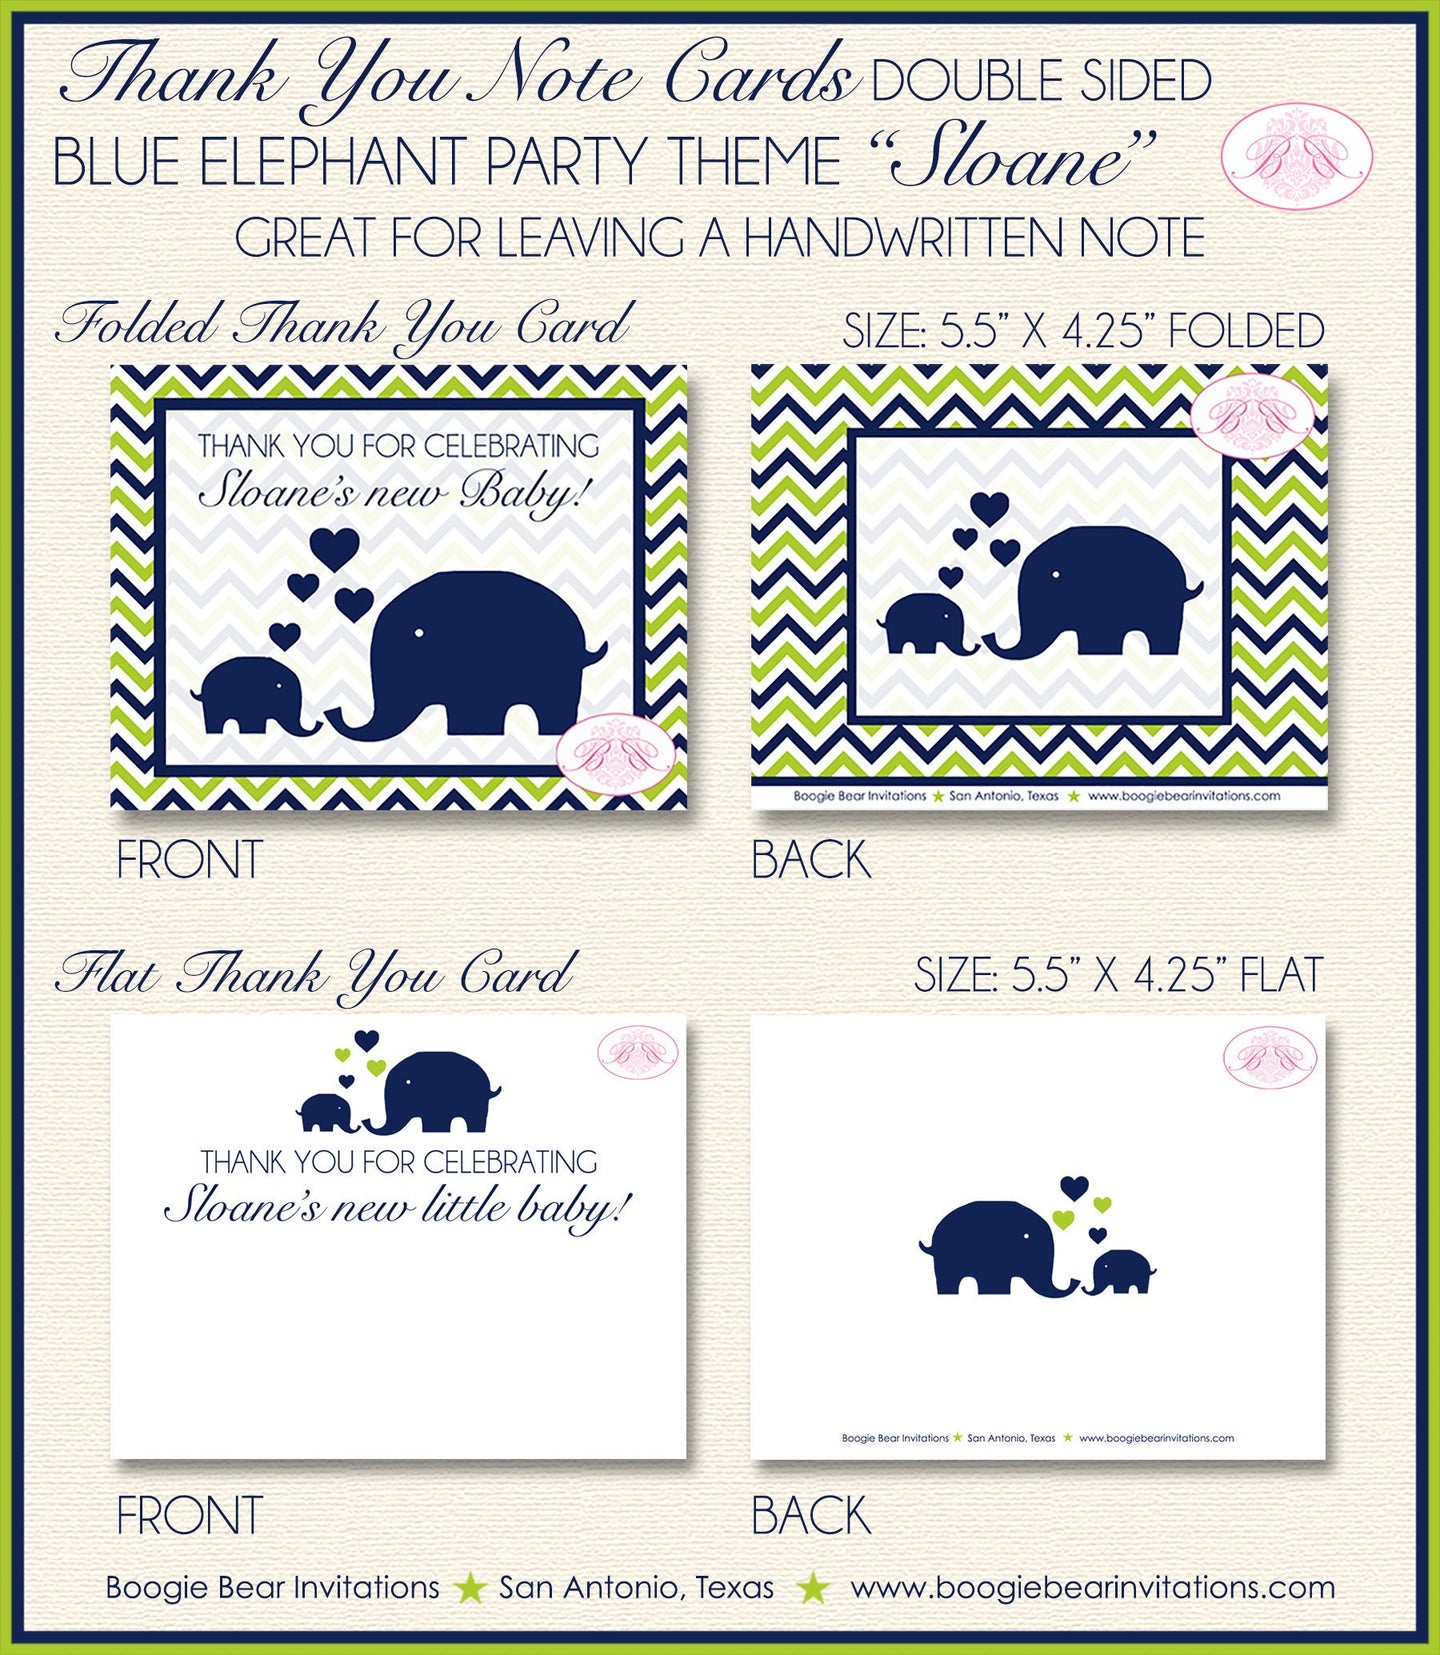 Blue Elephant Baby Shower Thank You Card Note Girl Boy Birthday Party Chevron Navy Lime Green Boogie Bear Invitations Sloane Theme Printed